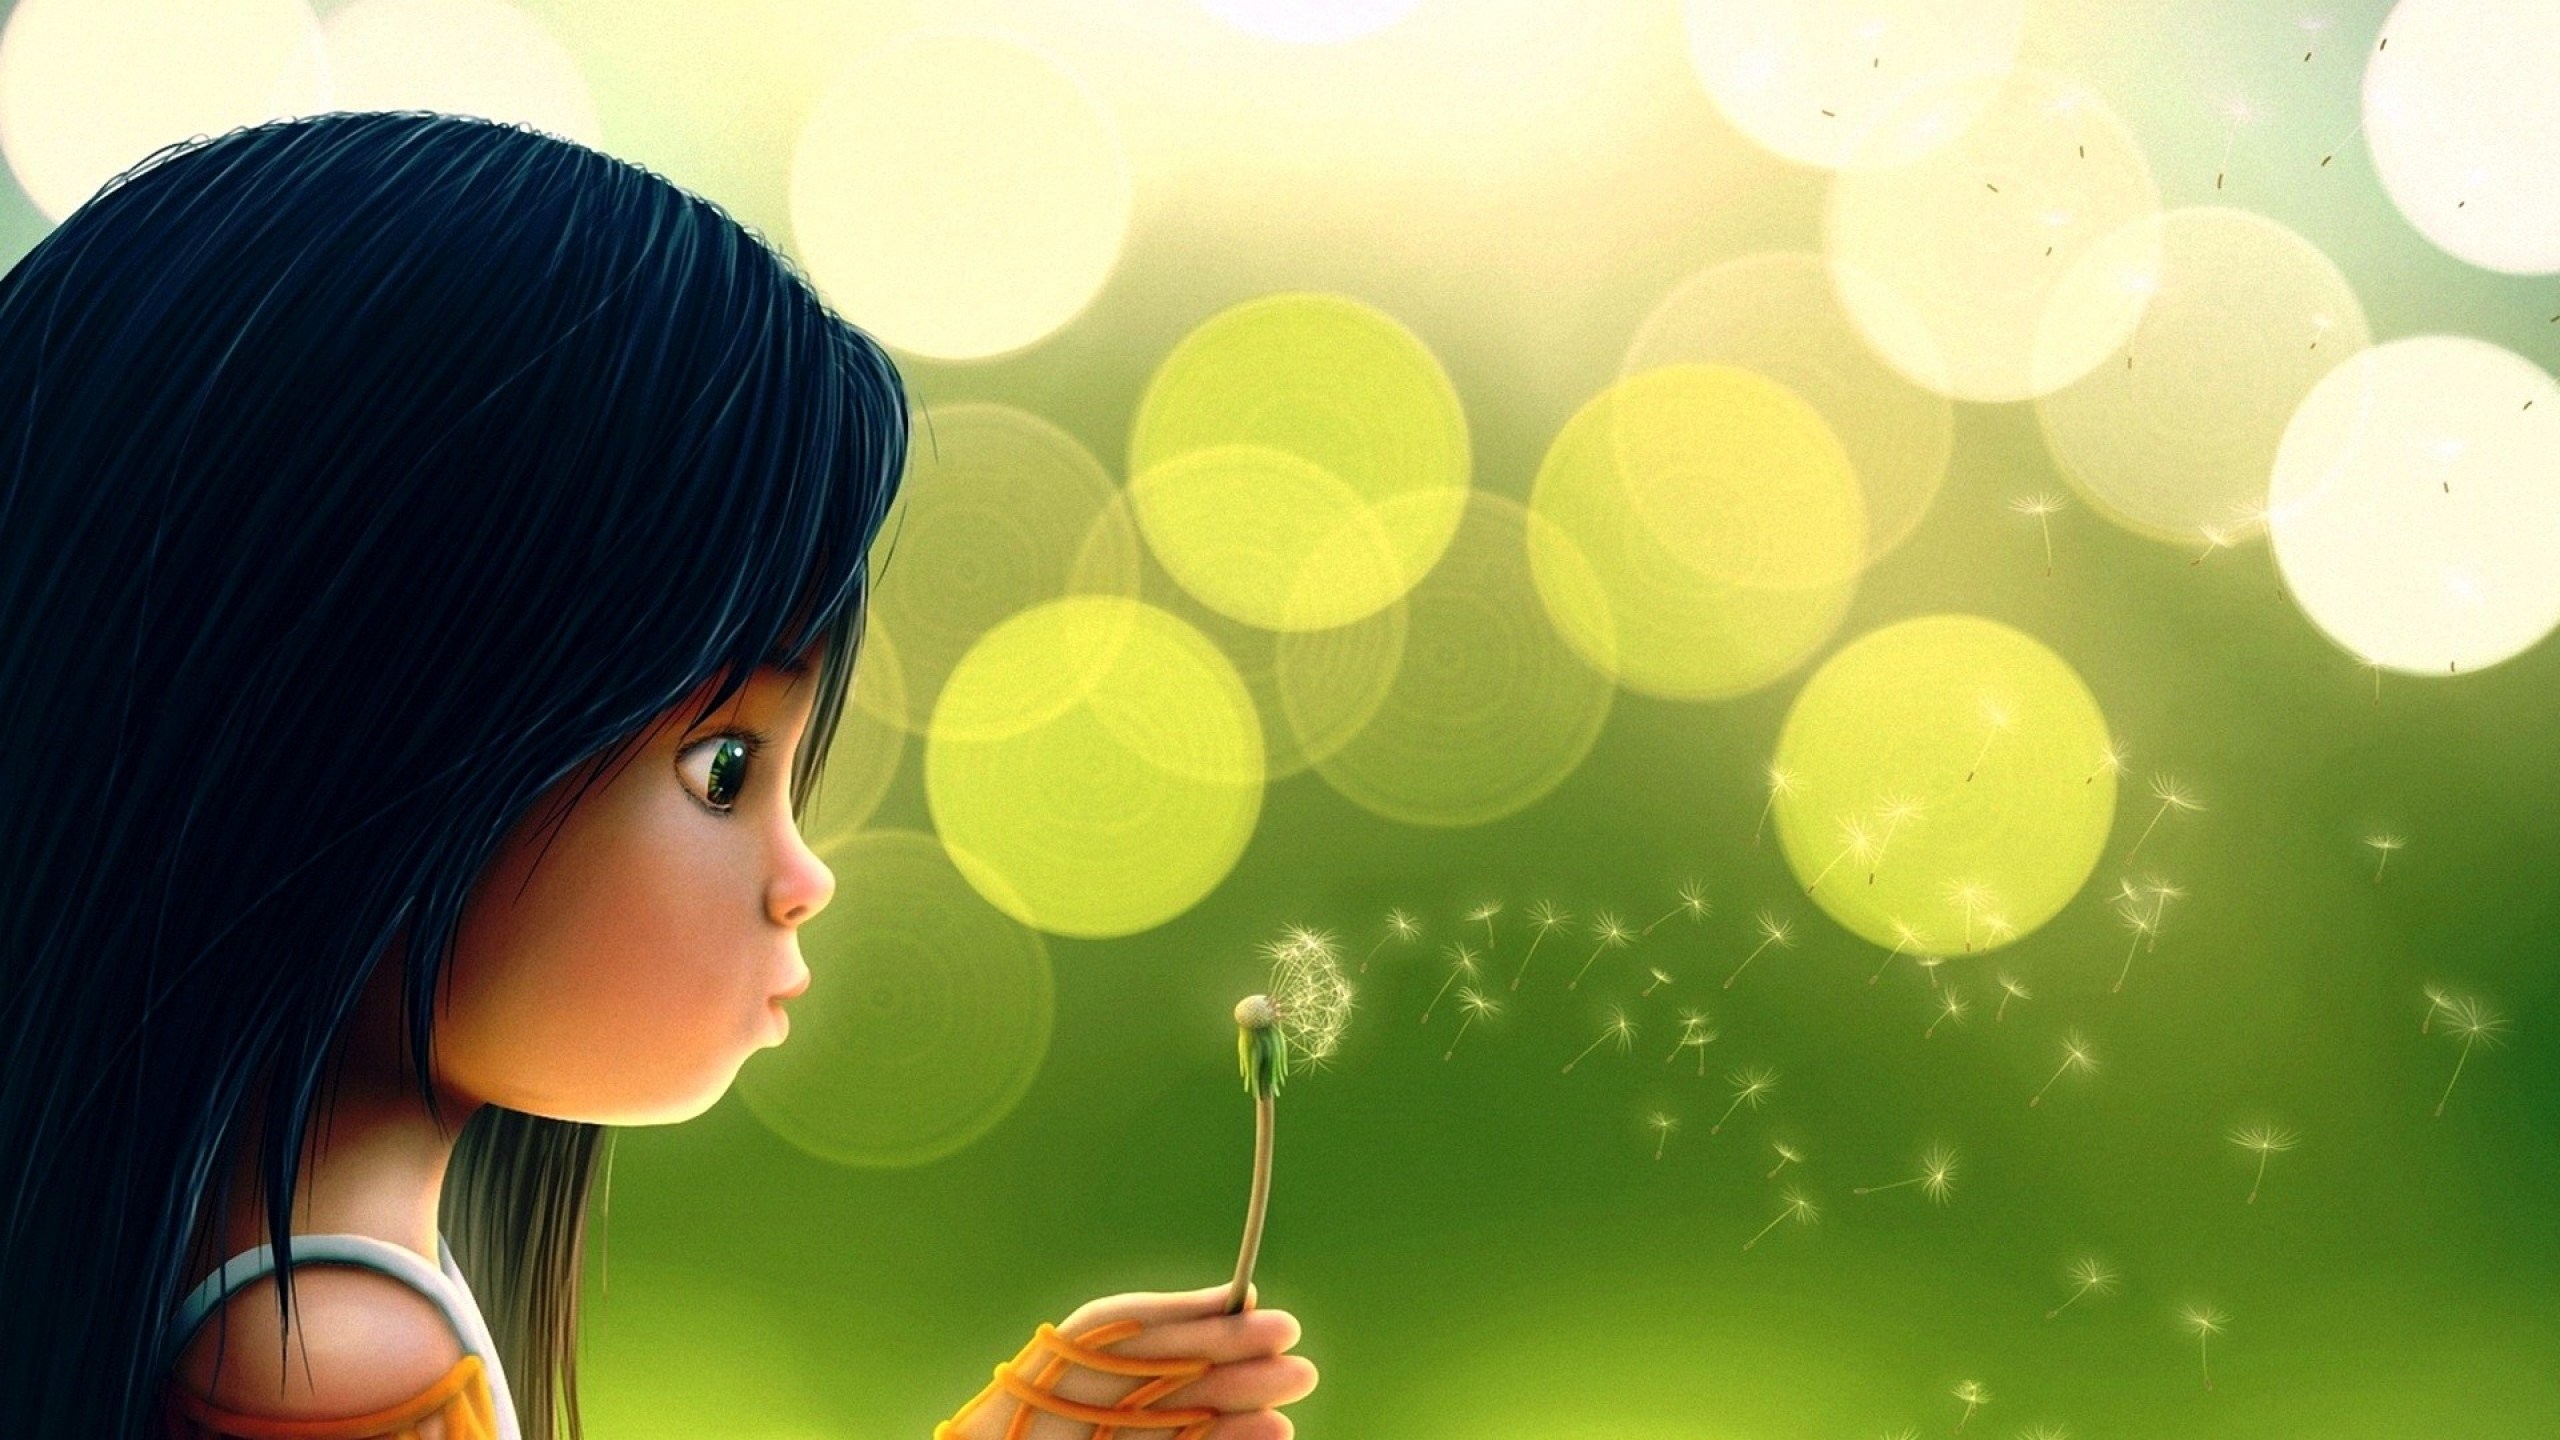 Cute Animated Girls Wallpapers 7hdwallpapers.